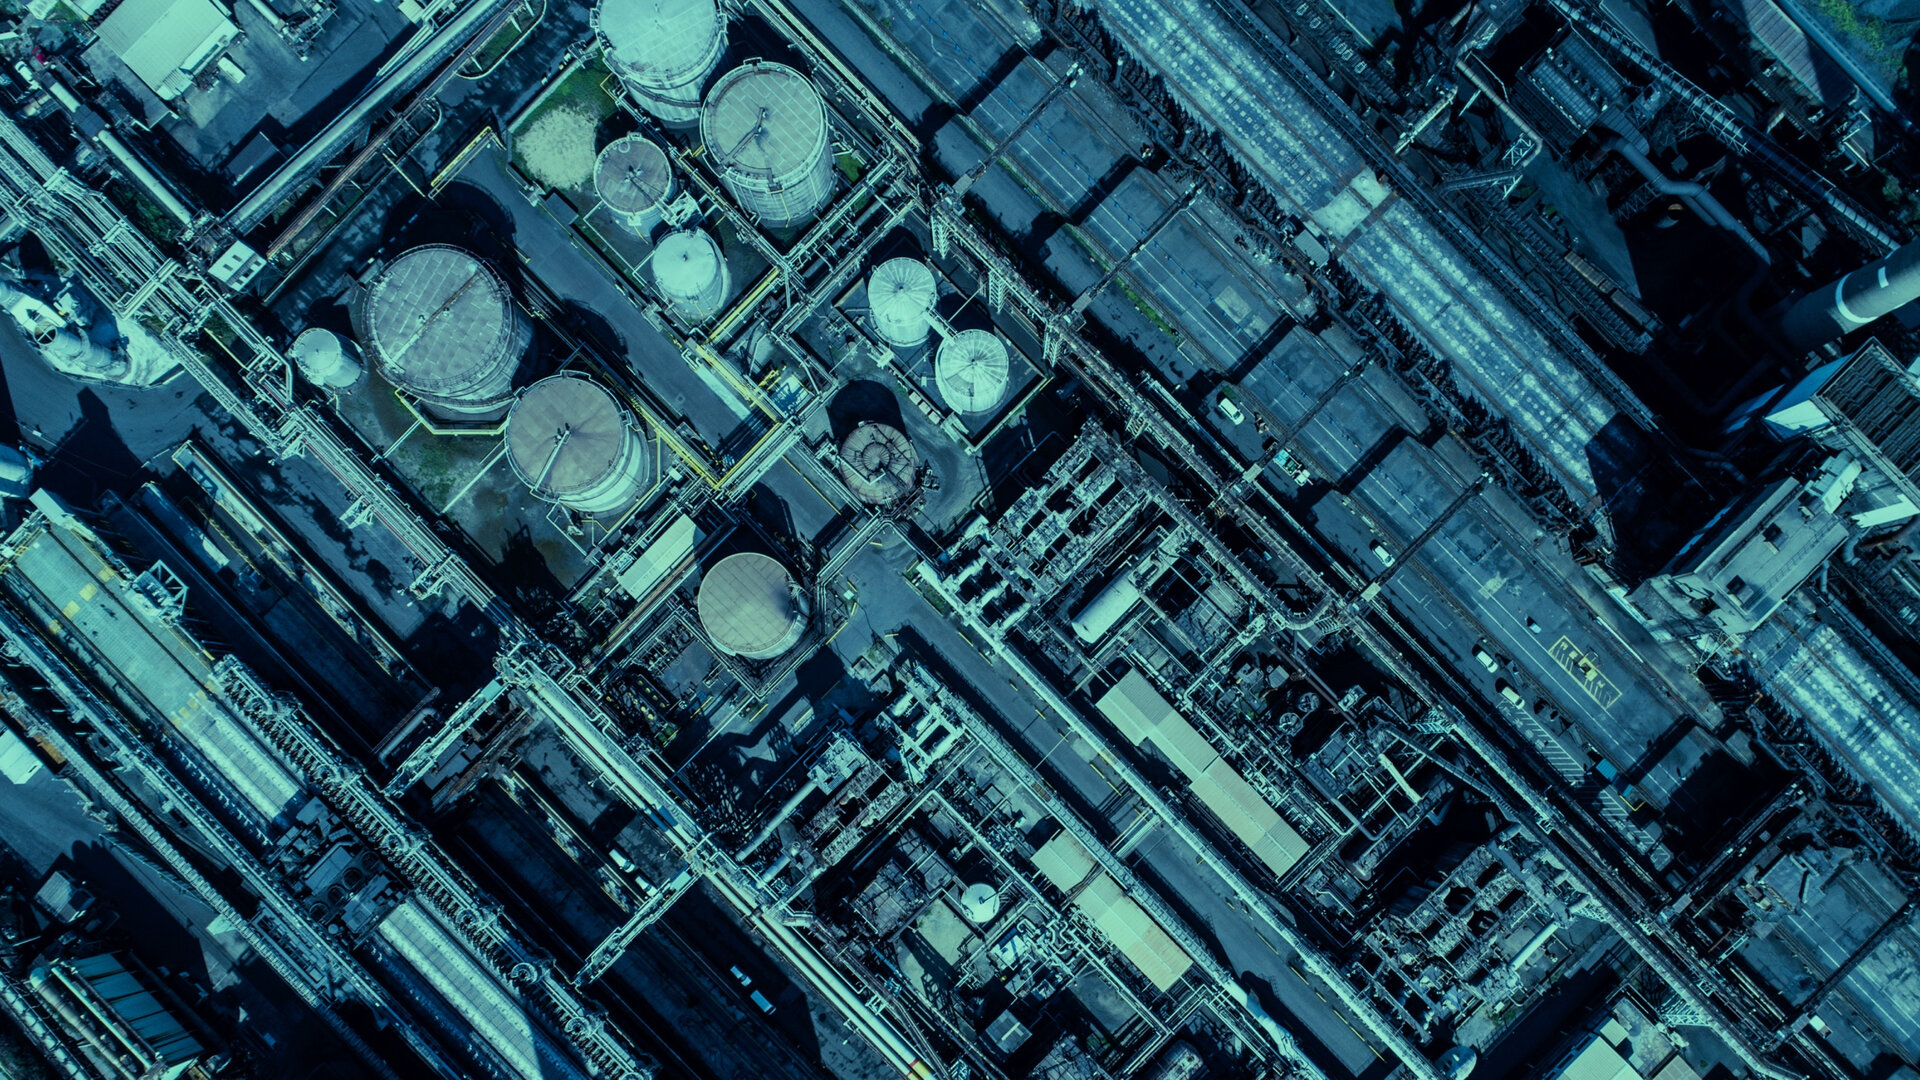 Industrial plant from above